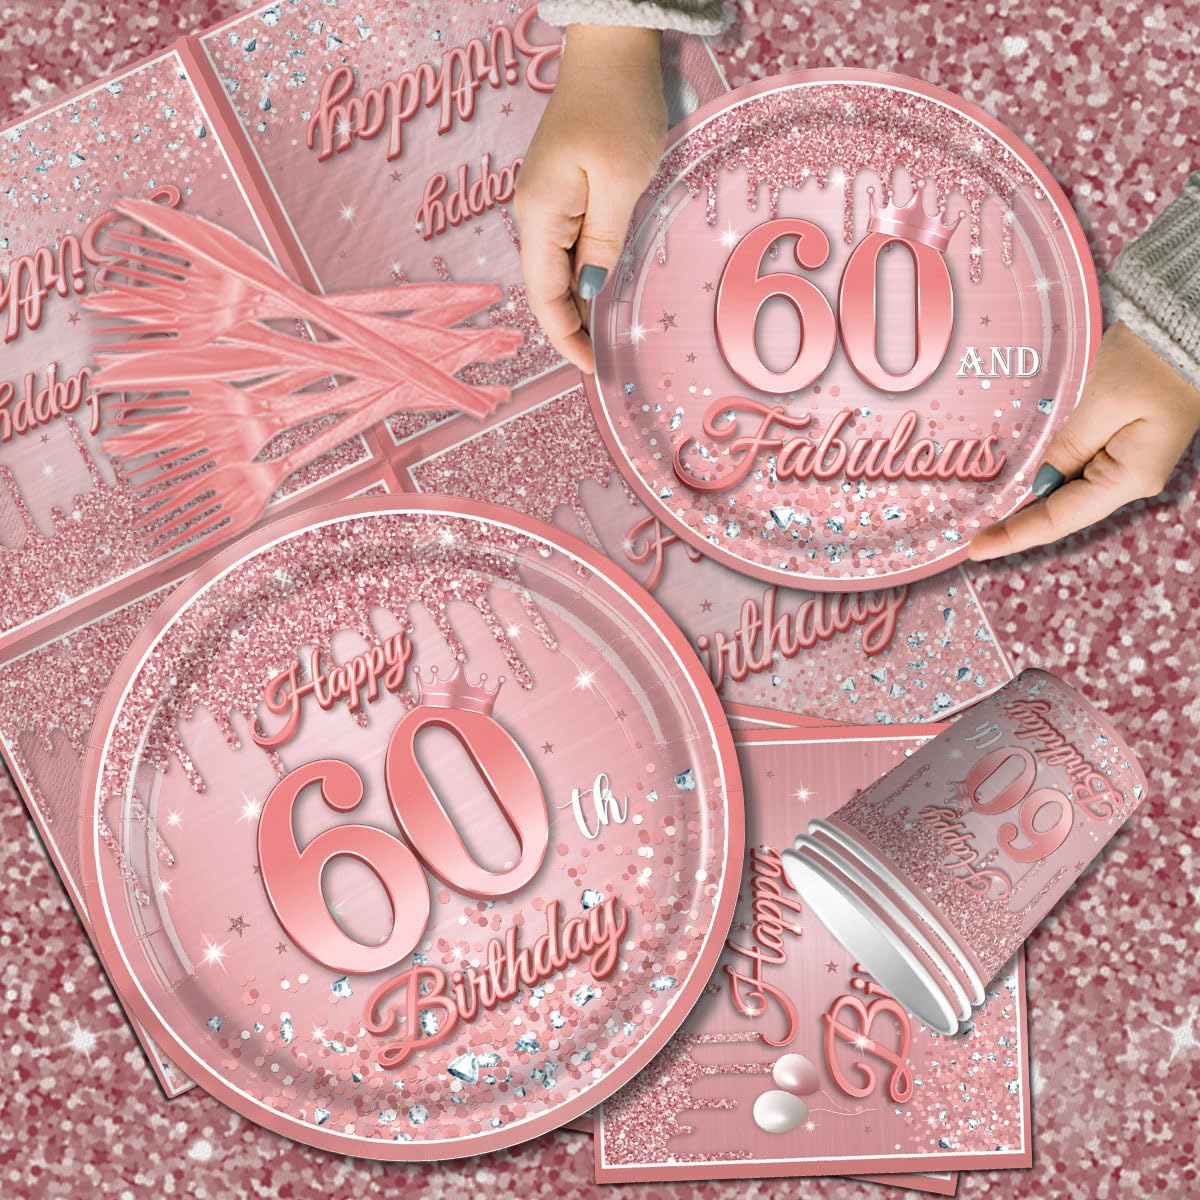 60th Birthday Rose Gold Supplies,142pcs Glitter Pink Rose Gold Tableware Include 60th Birthday Plates and Napkins Cups,Rose Gold Tablecloth Happy Birthday Banner for Women Happy 40th Birthday